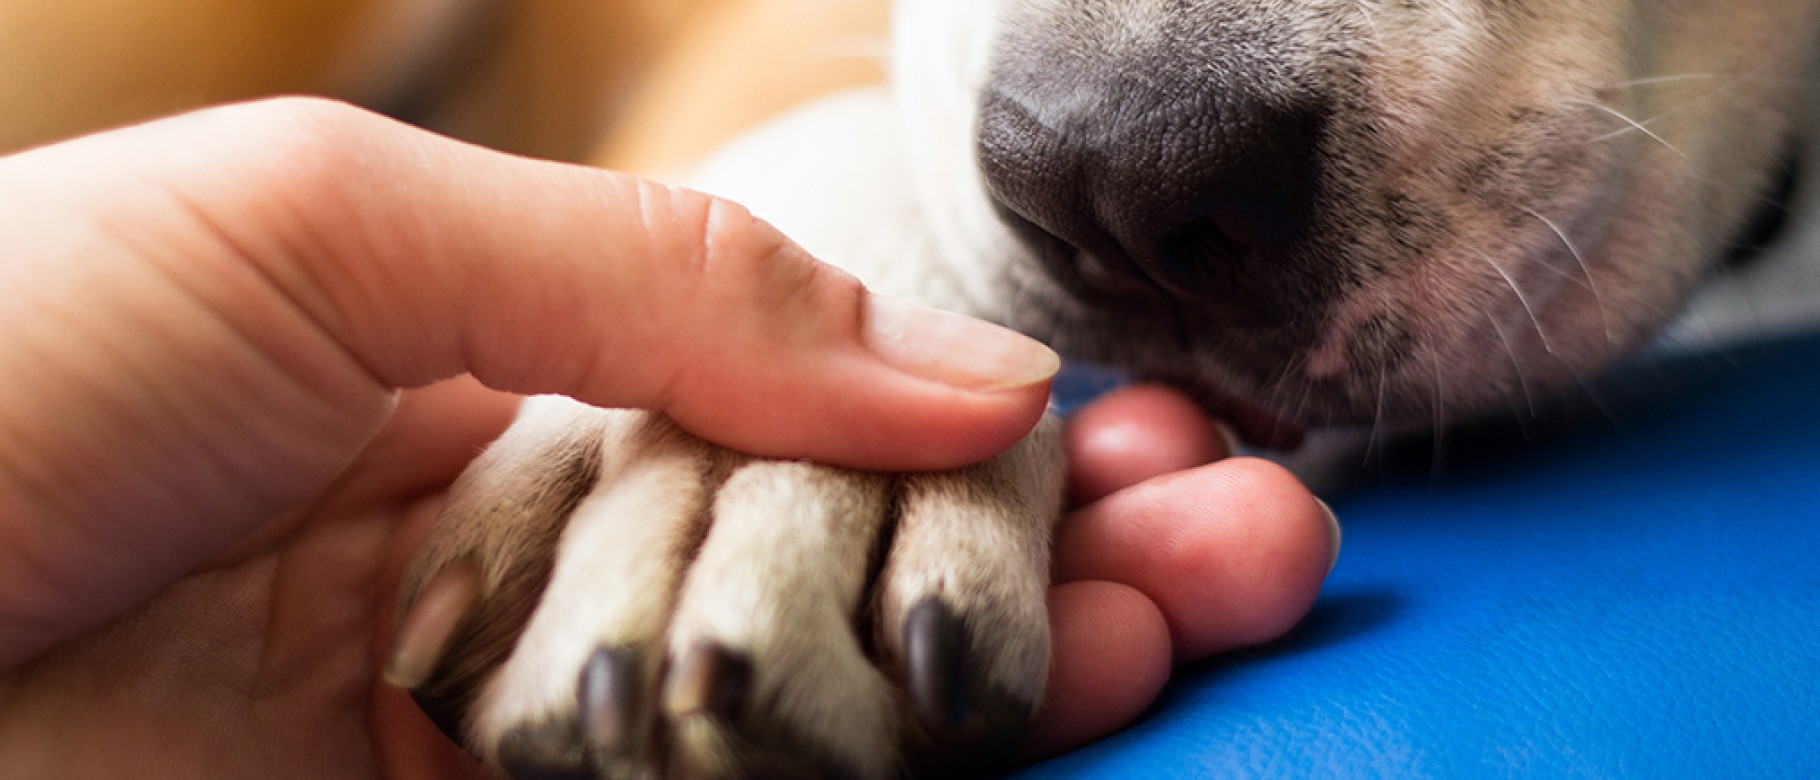 A close-up photo of a person holding a dog's paw